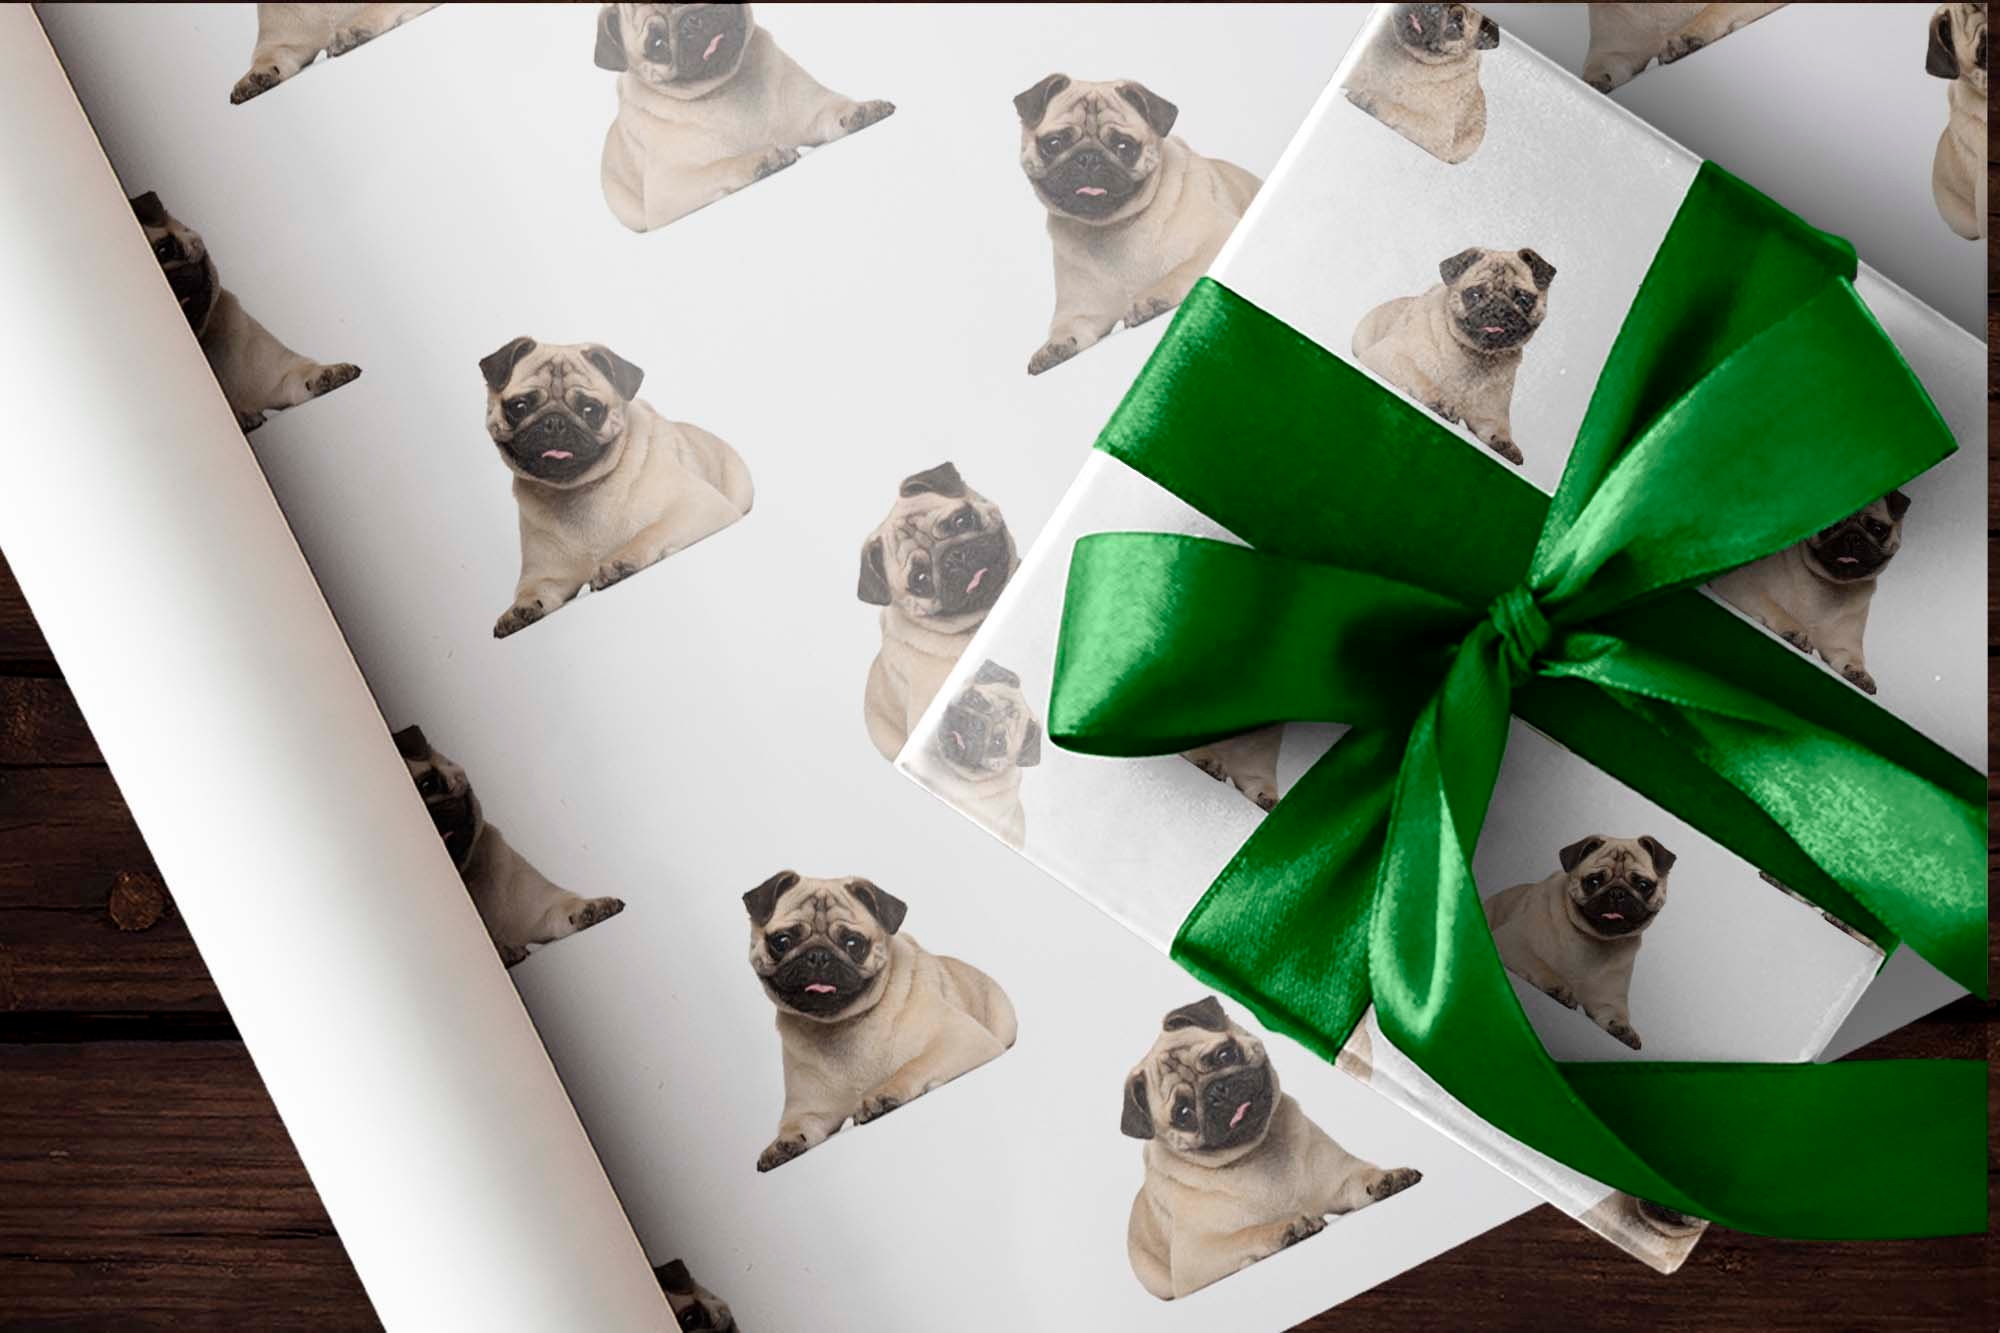 Cute Pug Puppy Dog Gift Wrap Thick Wrapping Paper Christmas Holiday Party  Decoration (20 inch x 30 inch sheet)